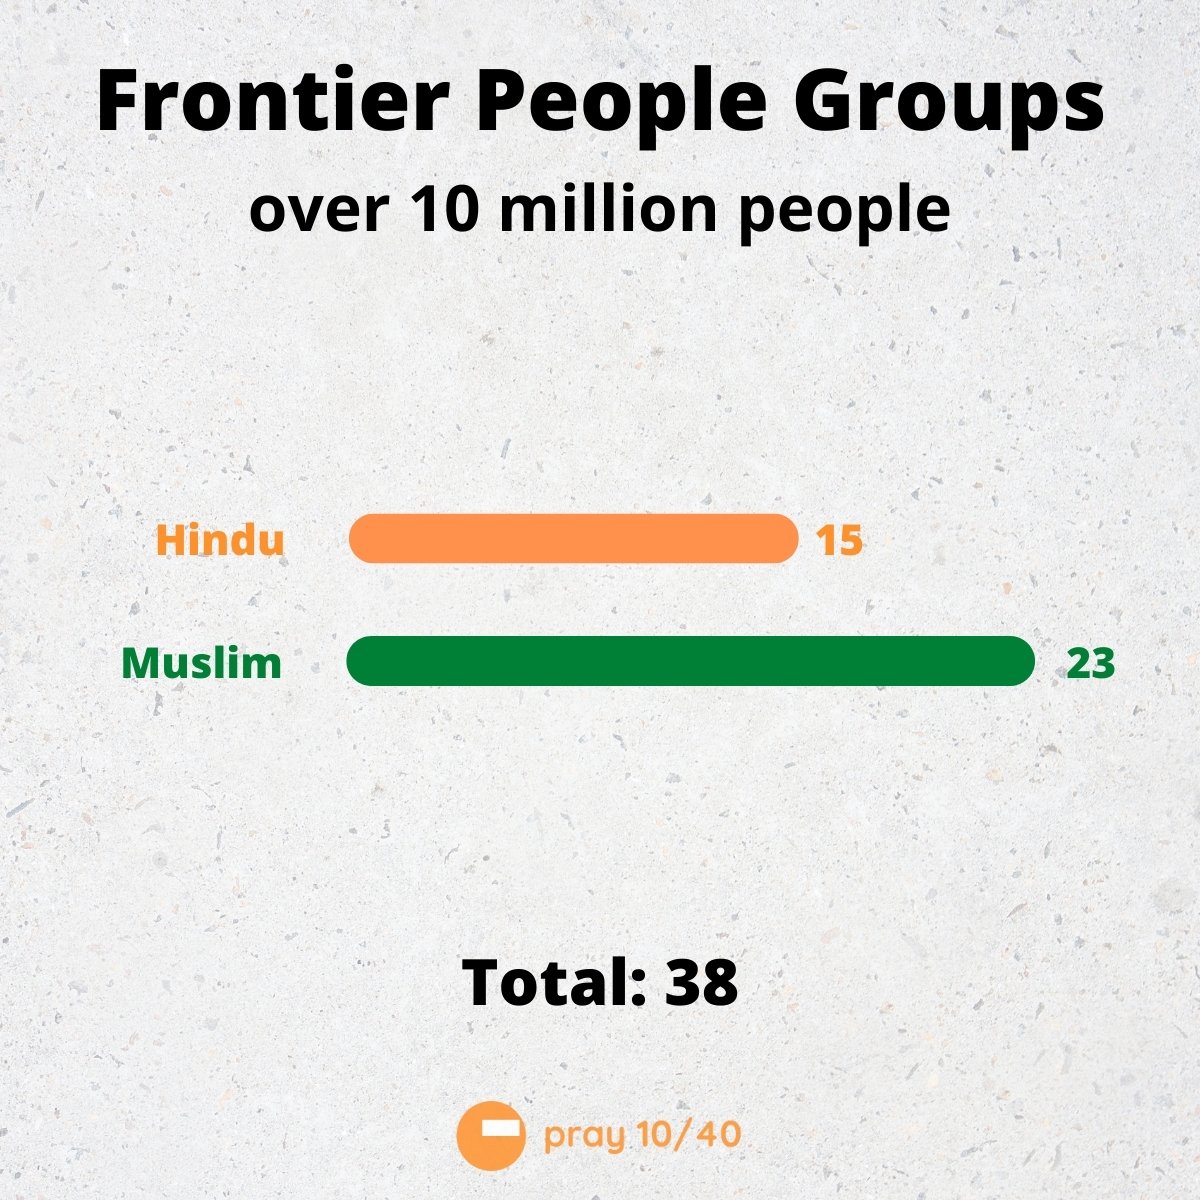 15 Hindu people groups and 23 Muslim people groups make up the 38 frontier people groups over 25 million people